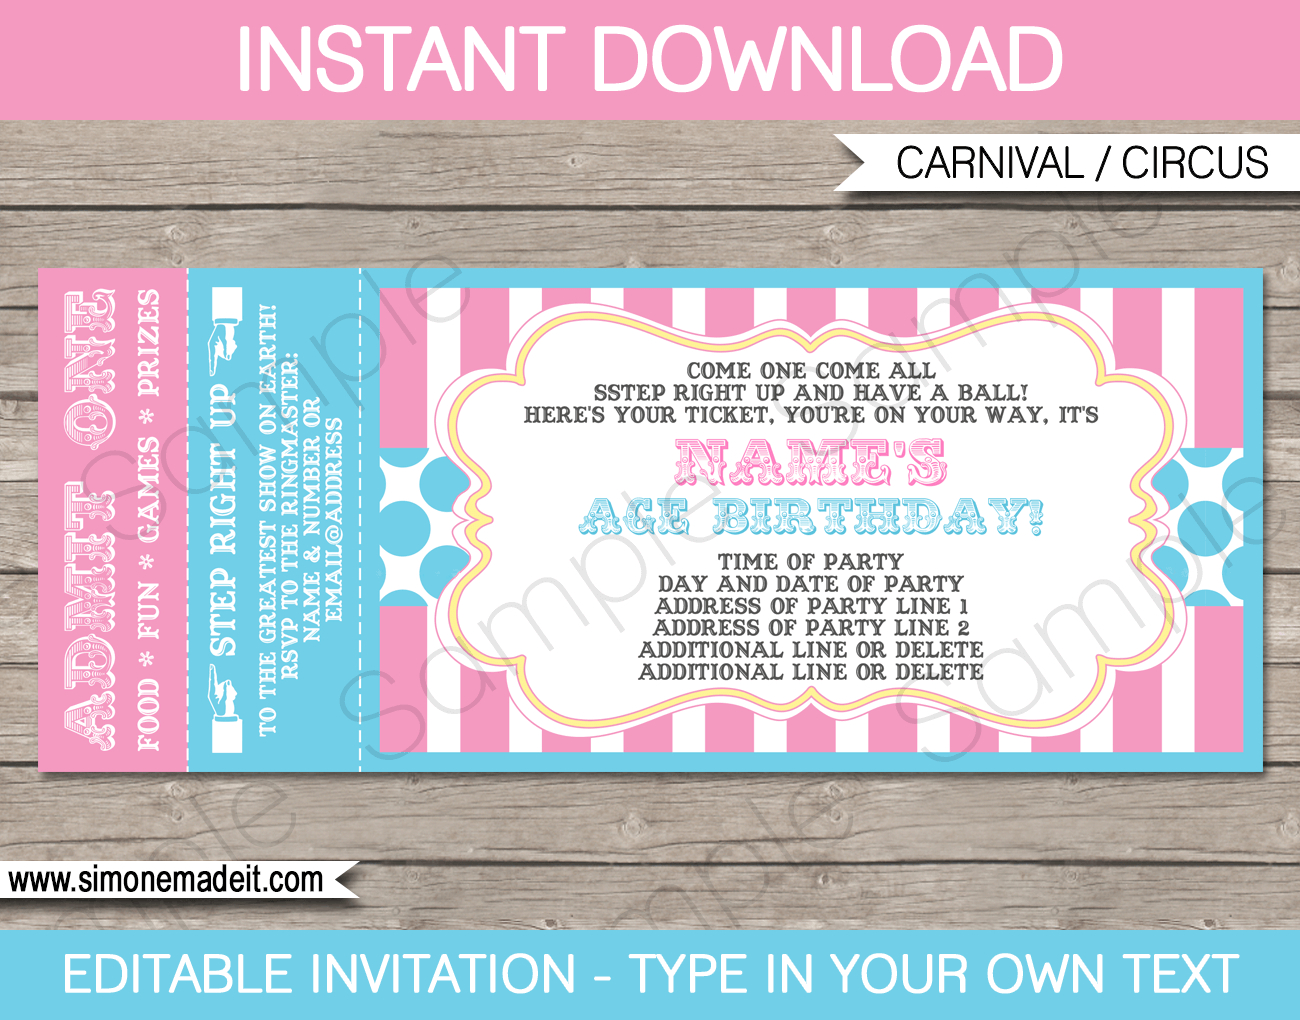 Carnival Ticket Invitations Template Carnival Circus Pink Aqua intended for measurements 1300 X 1020